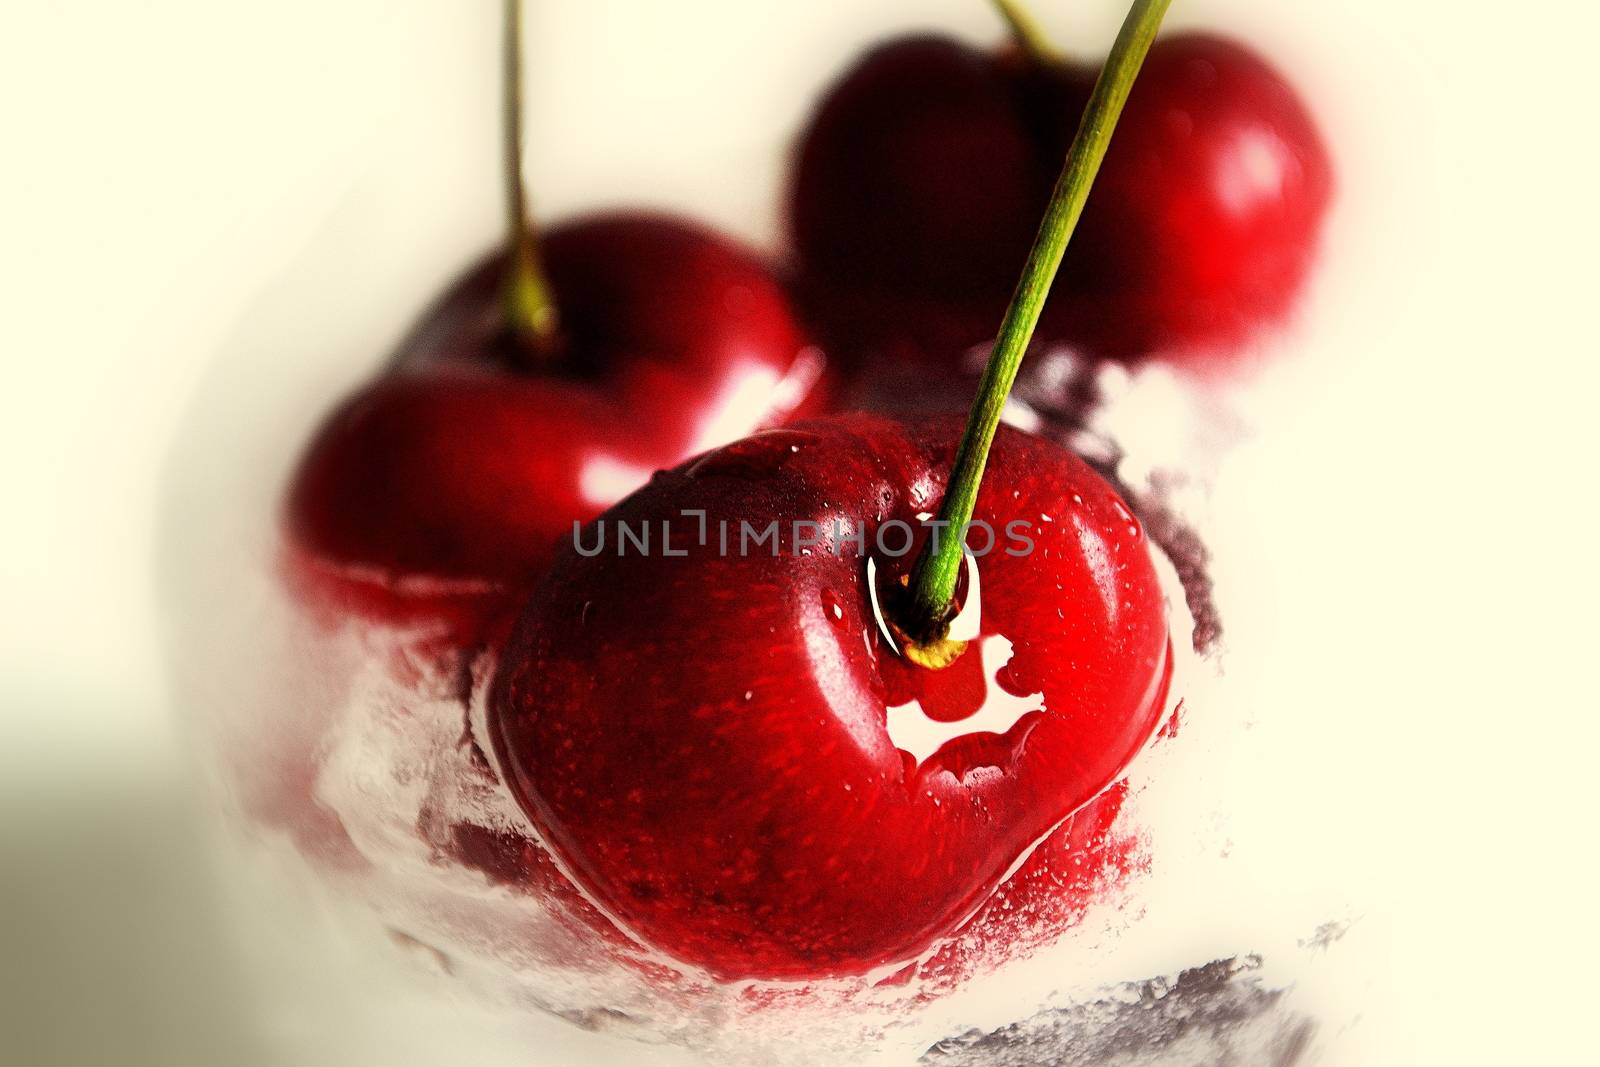 Three inviting red cherries by Mag6619